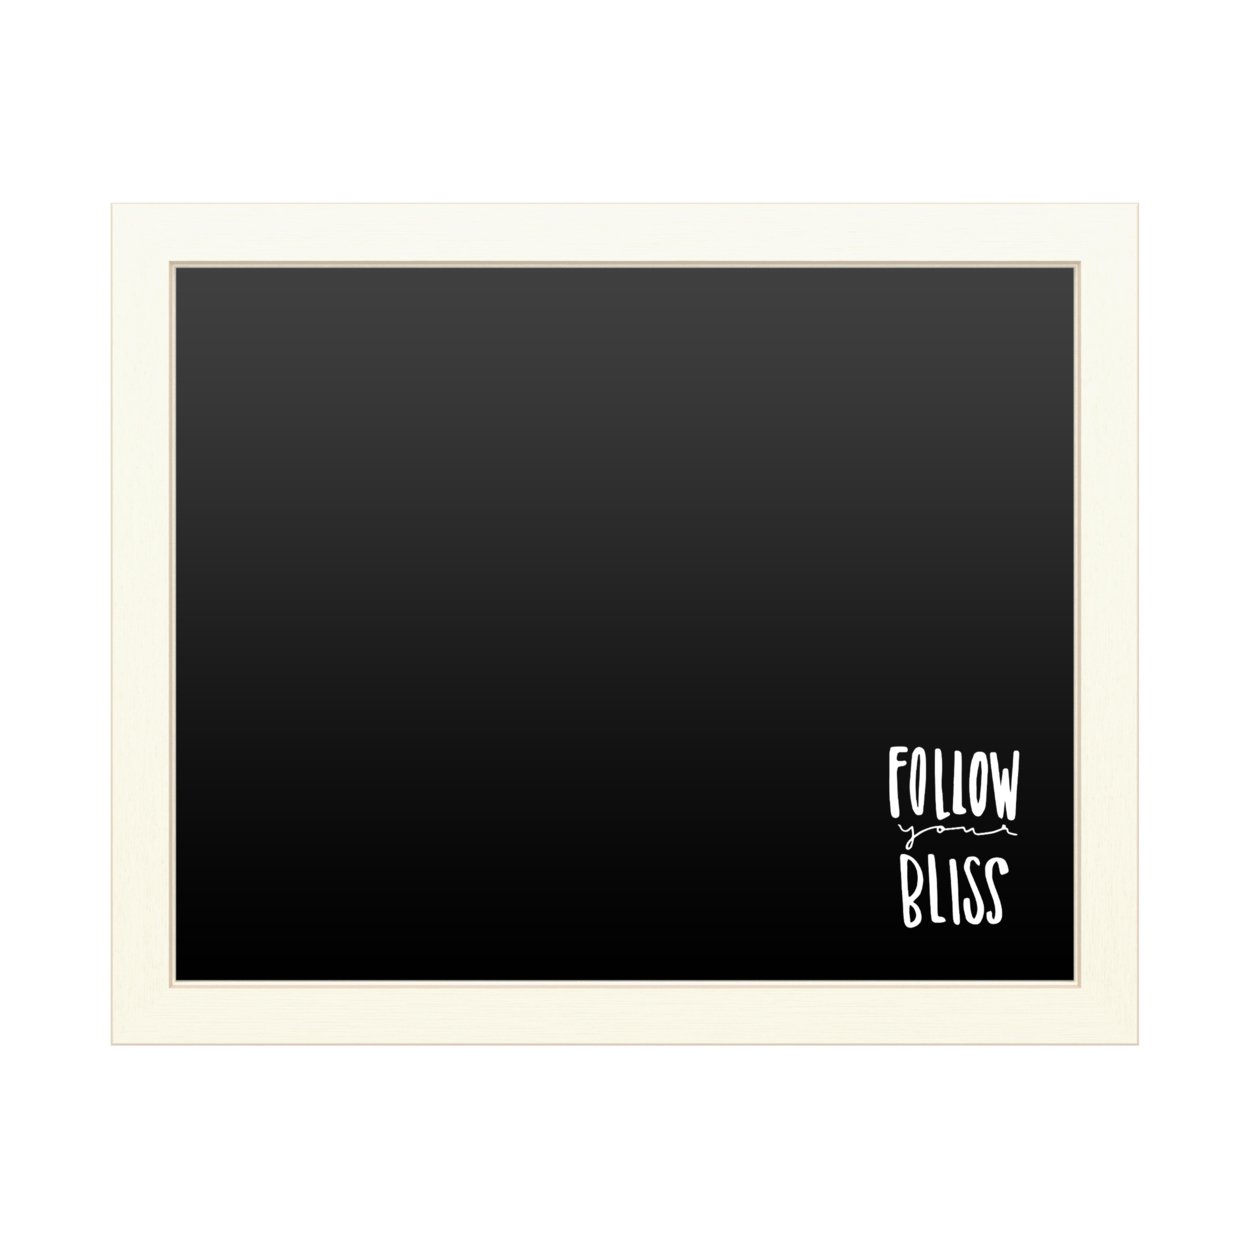 16 X 20 Chalk Board With Printed Artwork - Follow Your Bliss White Board - Ready To Hang Chalkboard